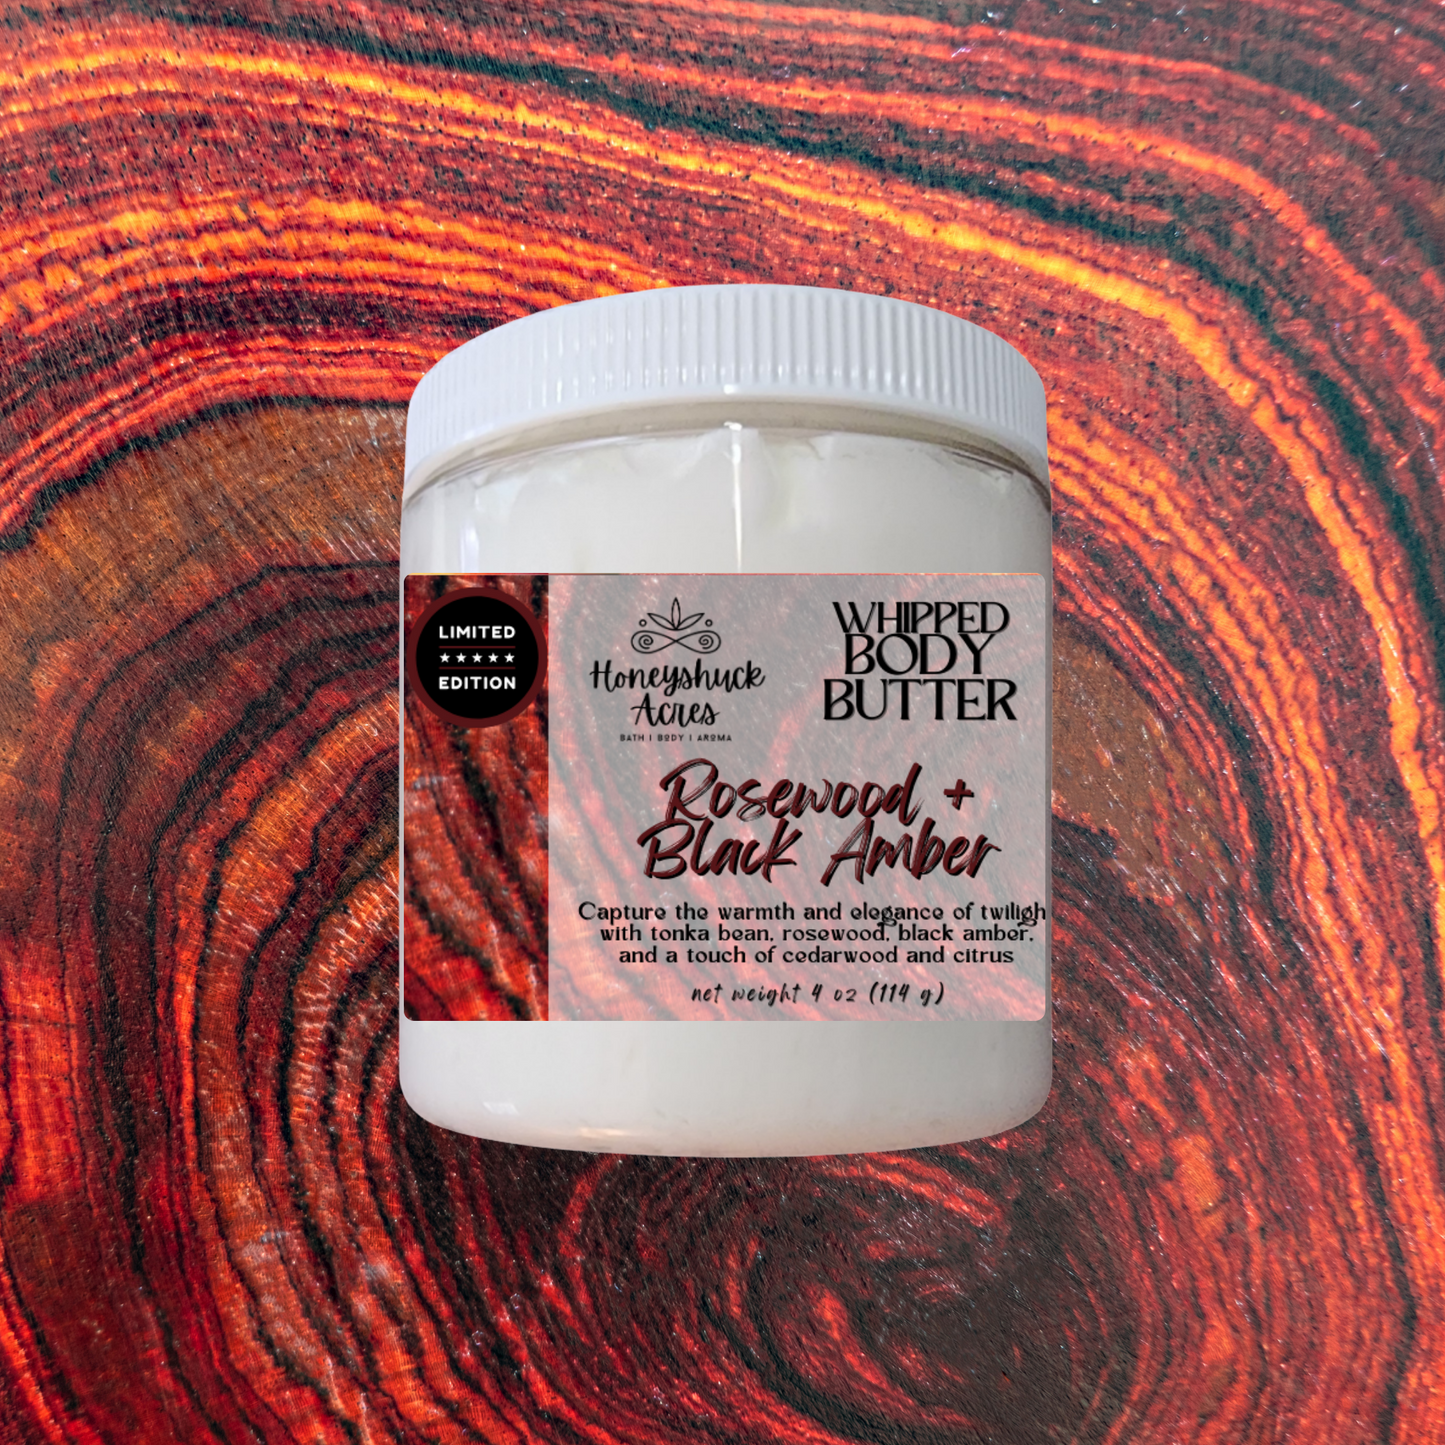 Limited Edition Whipped Body Butter | Rosewood + Black Amber